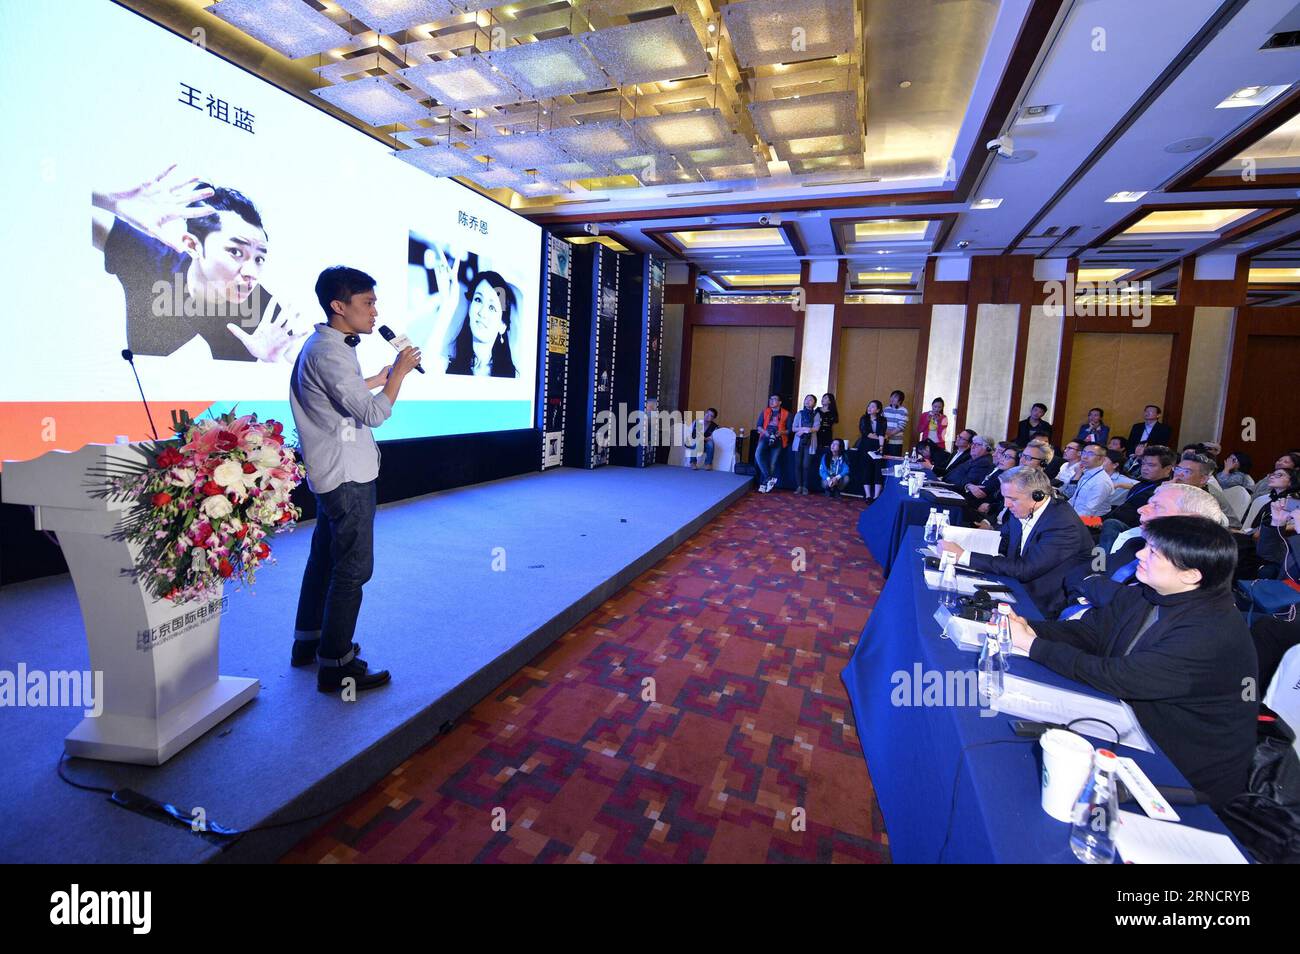 (160420) -- BEIJING, April 20, 2016 -- Director and screenwriter Tian Li introduces his work at the Motion Picture Association (MPA) Workshop in Beijing, capital of China, April 20, 2016. The closing ceremony of MPA workshop is held during the Beijing International Film Festival here on Wednesday. Winners of the workshop would get the chance to communicate with more famous directors and producers.) (zkr) CHINA-BEIJING-FILM FESTIVAL-MPA WORKSHOP(CN) LixXin PUBLICATIONxNOTxINxCHN   160420 Beijing April 20 2016 Director and Screenwriter Tian left introduces His Work AT The Motion Picture Associat Stock Photo